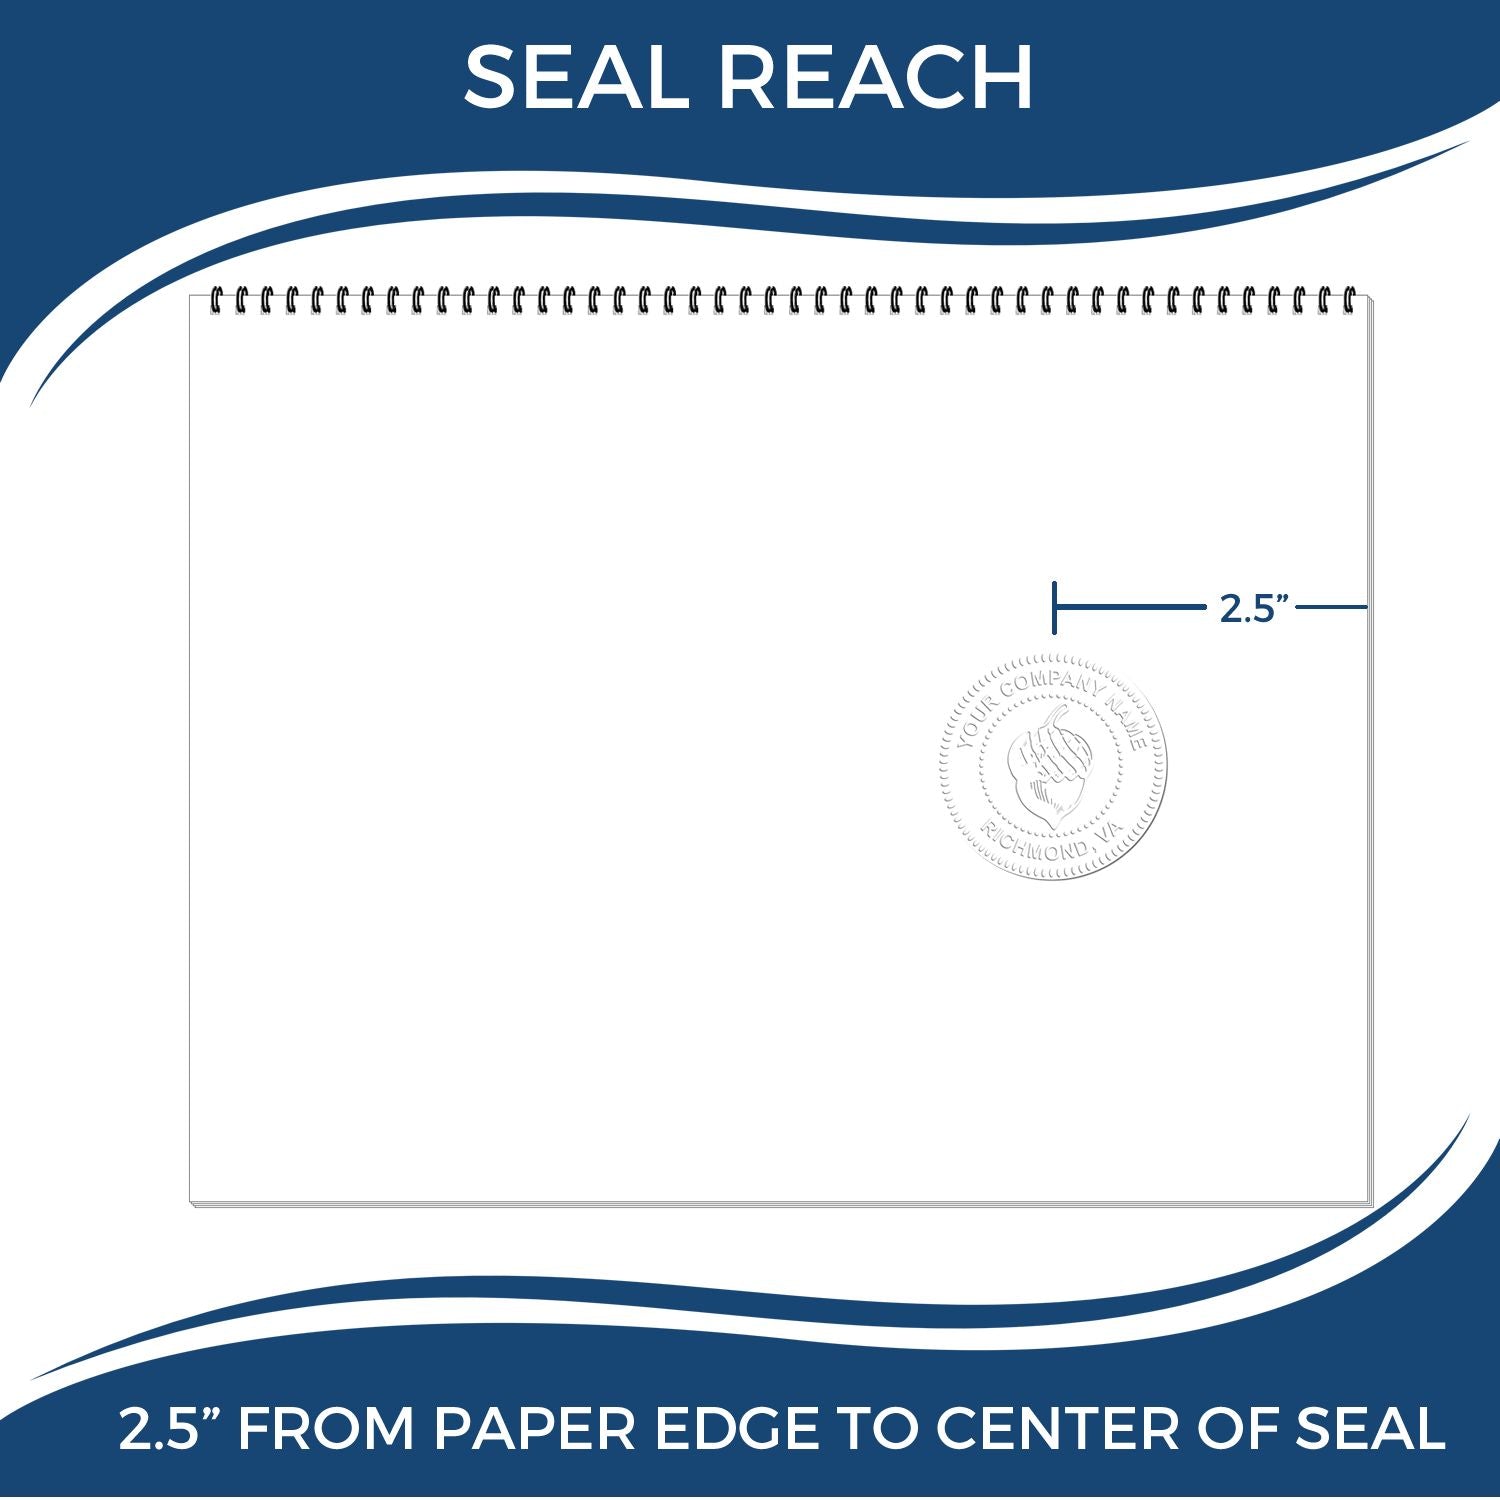 An infographic showing the seal reach which is represented by a ruler and a miniature seal image of the Long Reach Mississippi Land Surveyor Seal